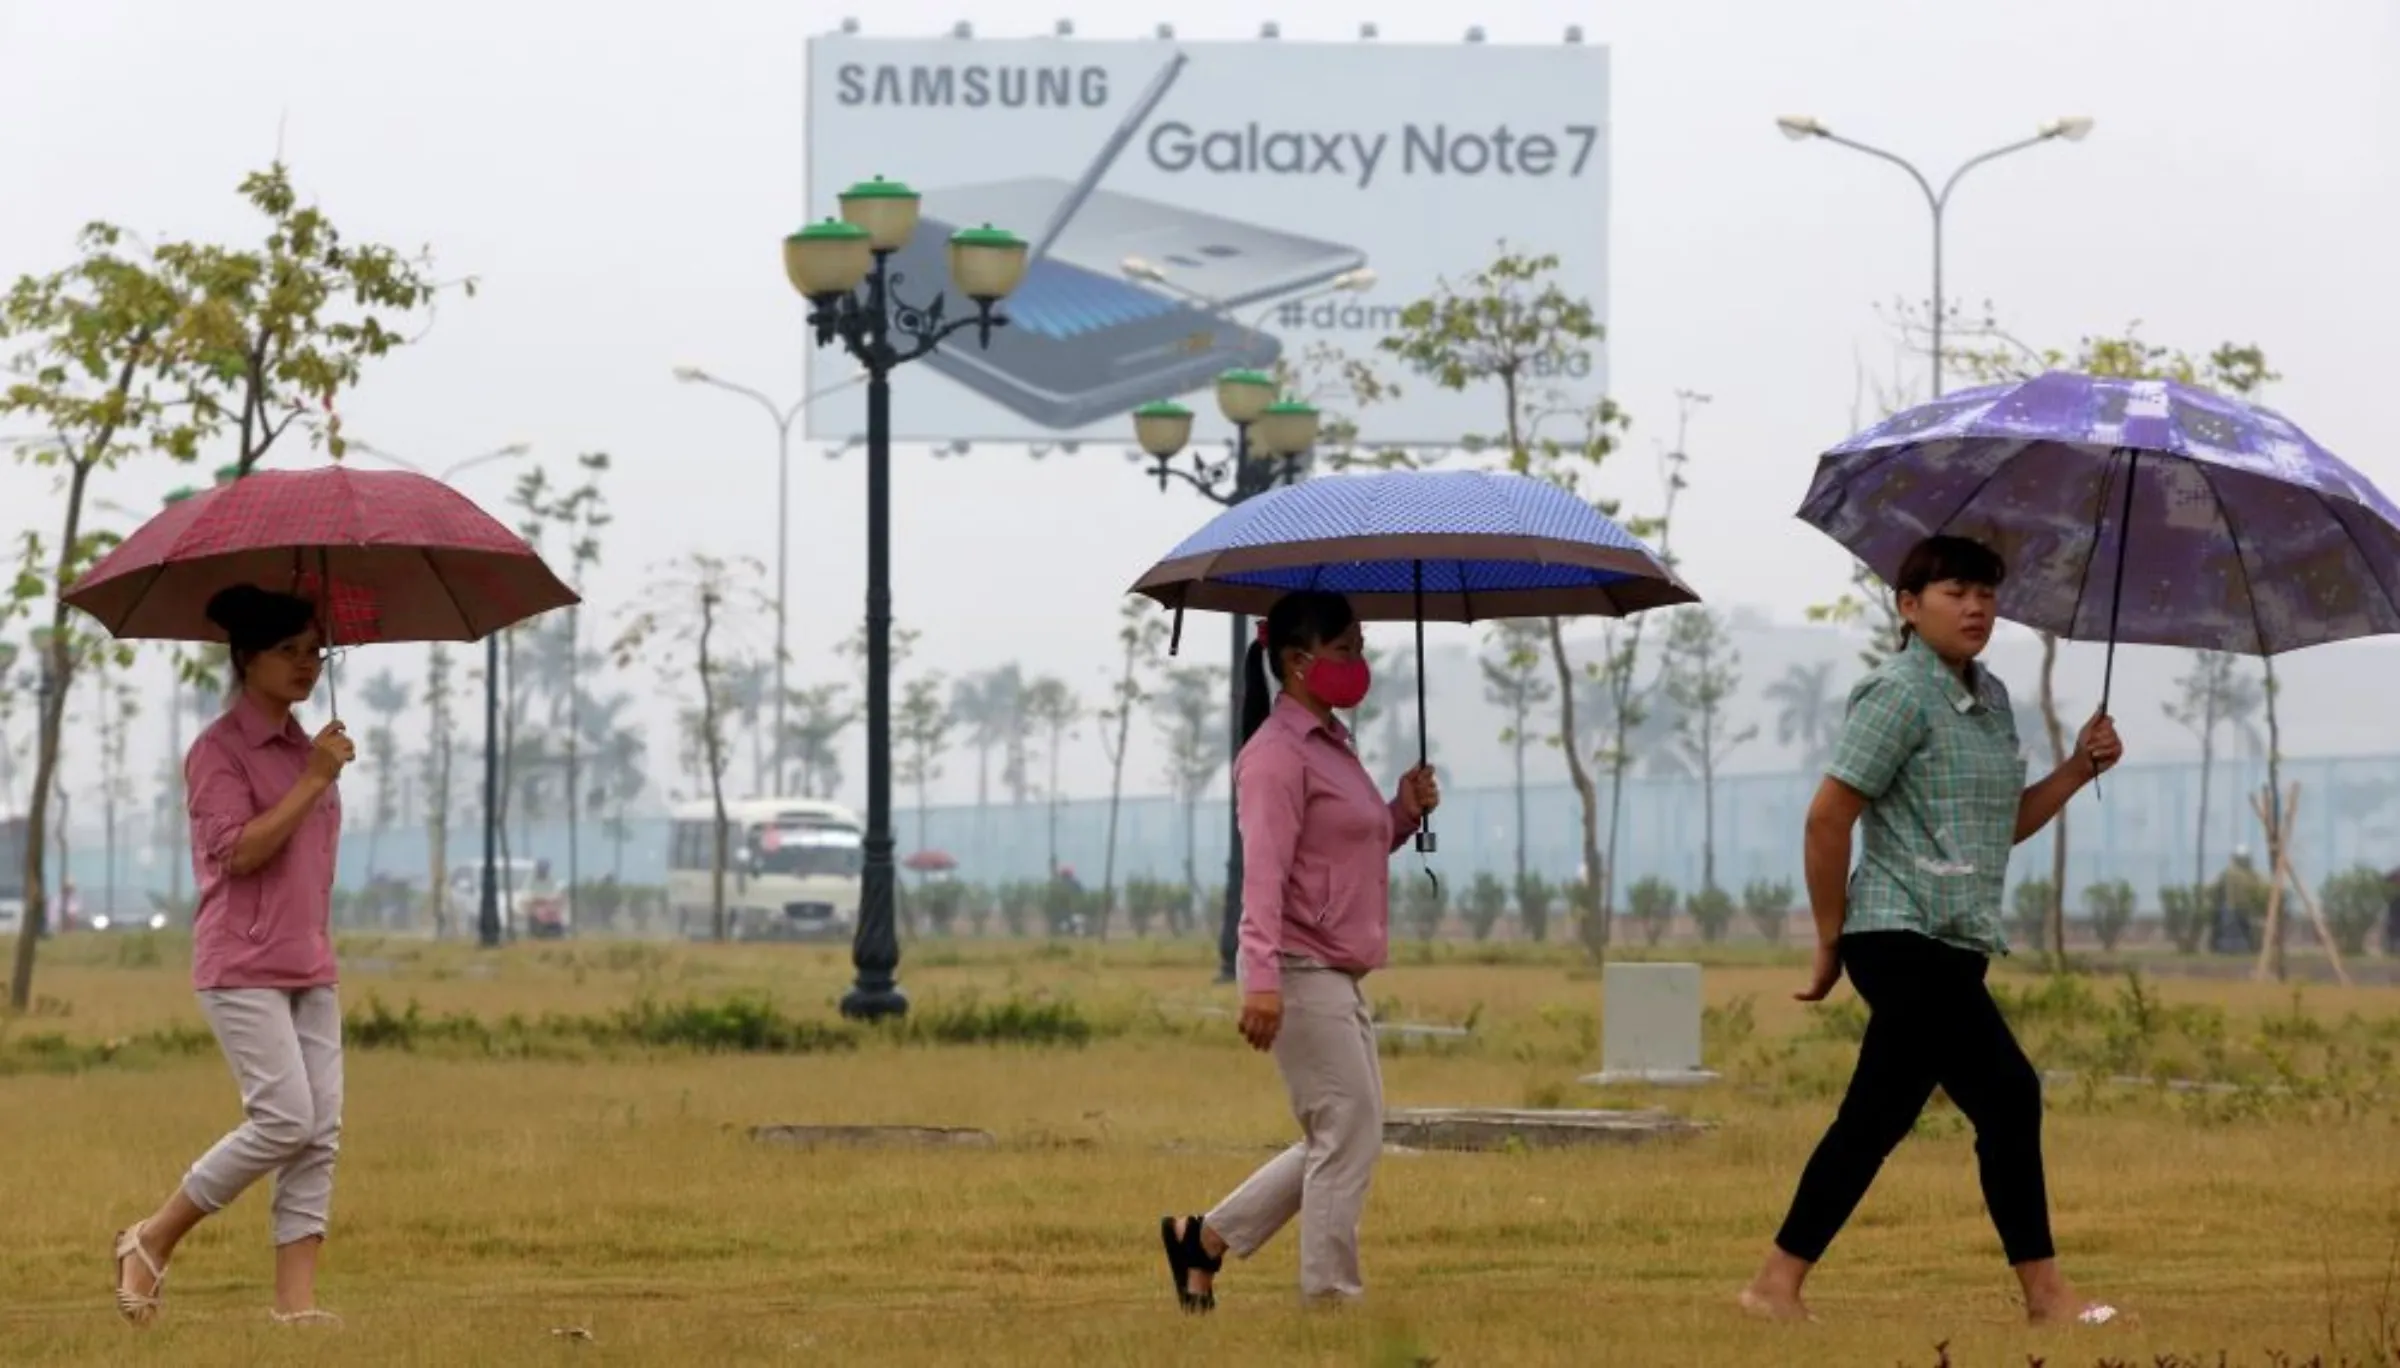 Employees pass a billboard advertisement for the Samsung Galaxy Note 7 on the way to work at the Samsung factory in Thai Nguyen province, north of Hanoi, Vietnam October 13, 2016. REUTERS/Kham